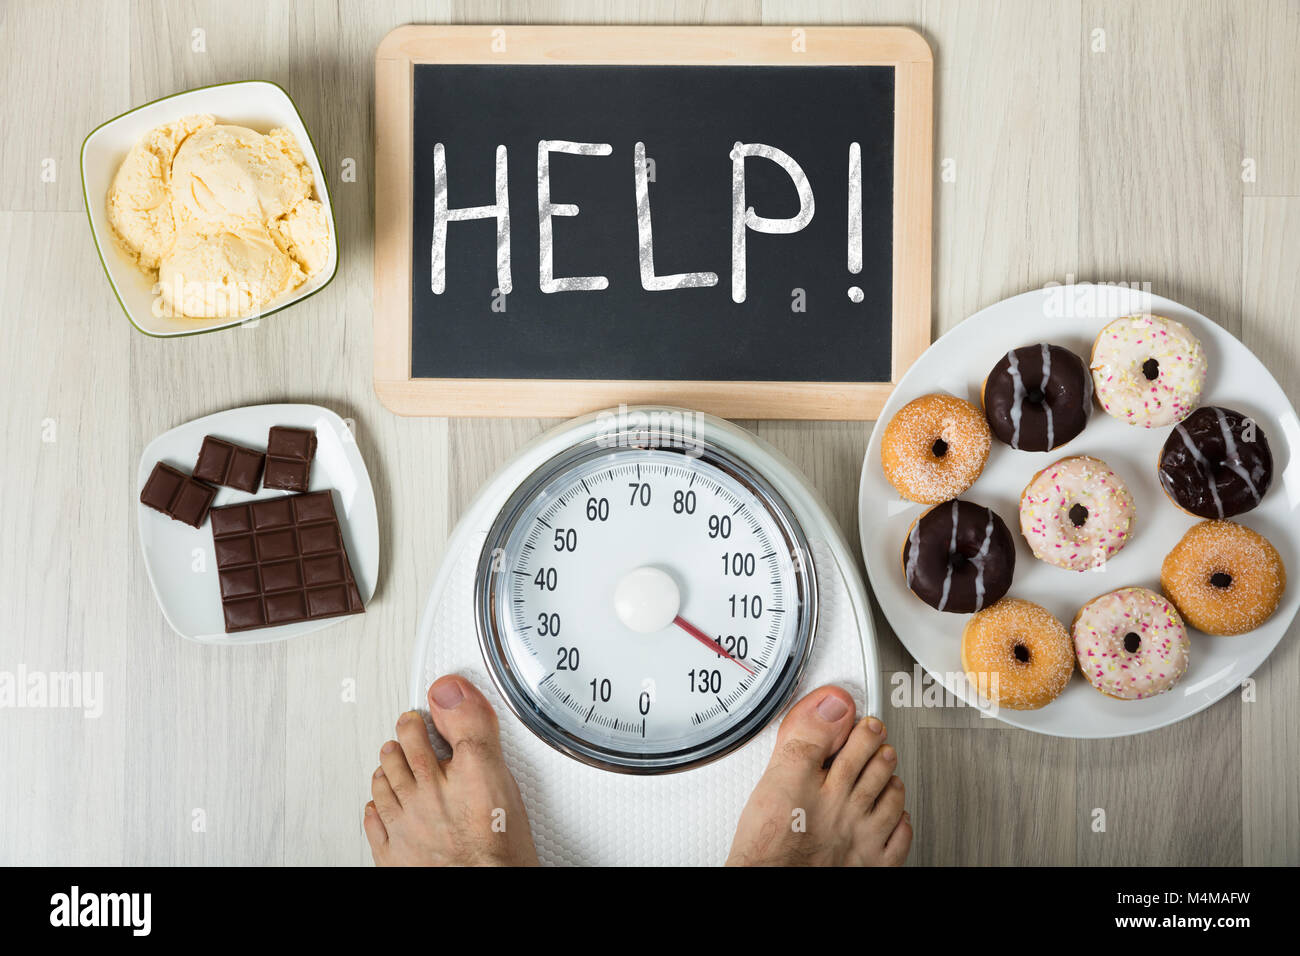 A Man's Feet On Weight Scale With Desserts And Help Text Written On Slate Stock Photo